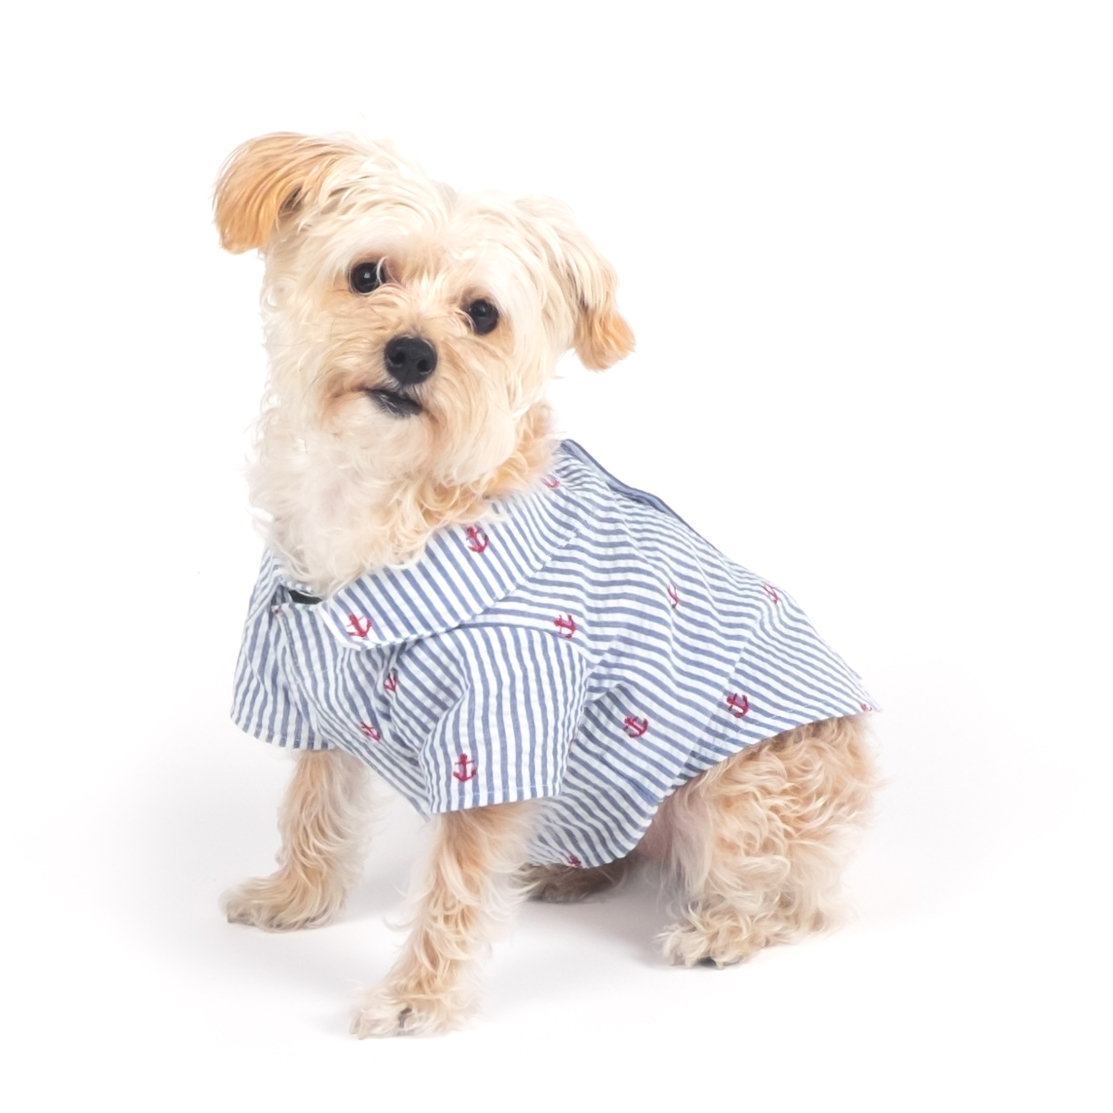 Want summer fashion ideas for your dog? Discover these adorable madras and seersucker dresses and shirts!